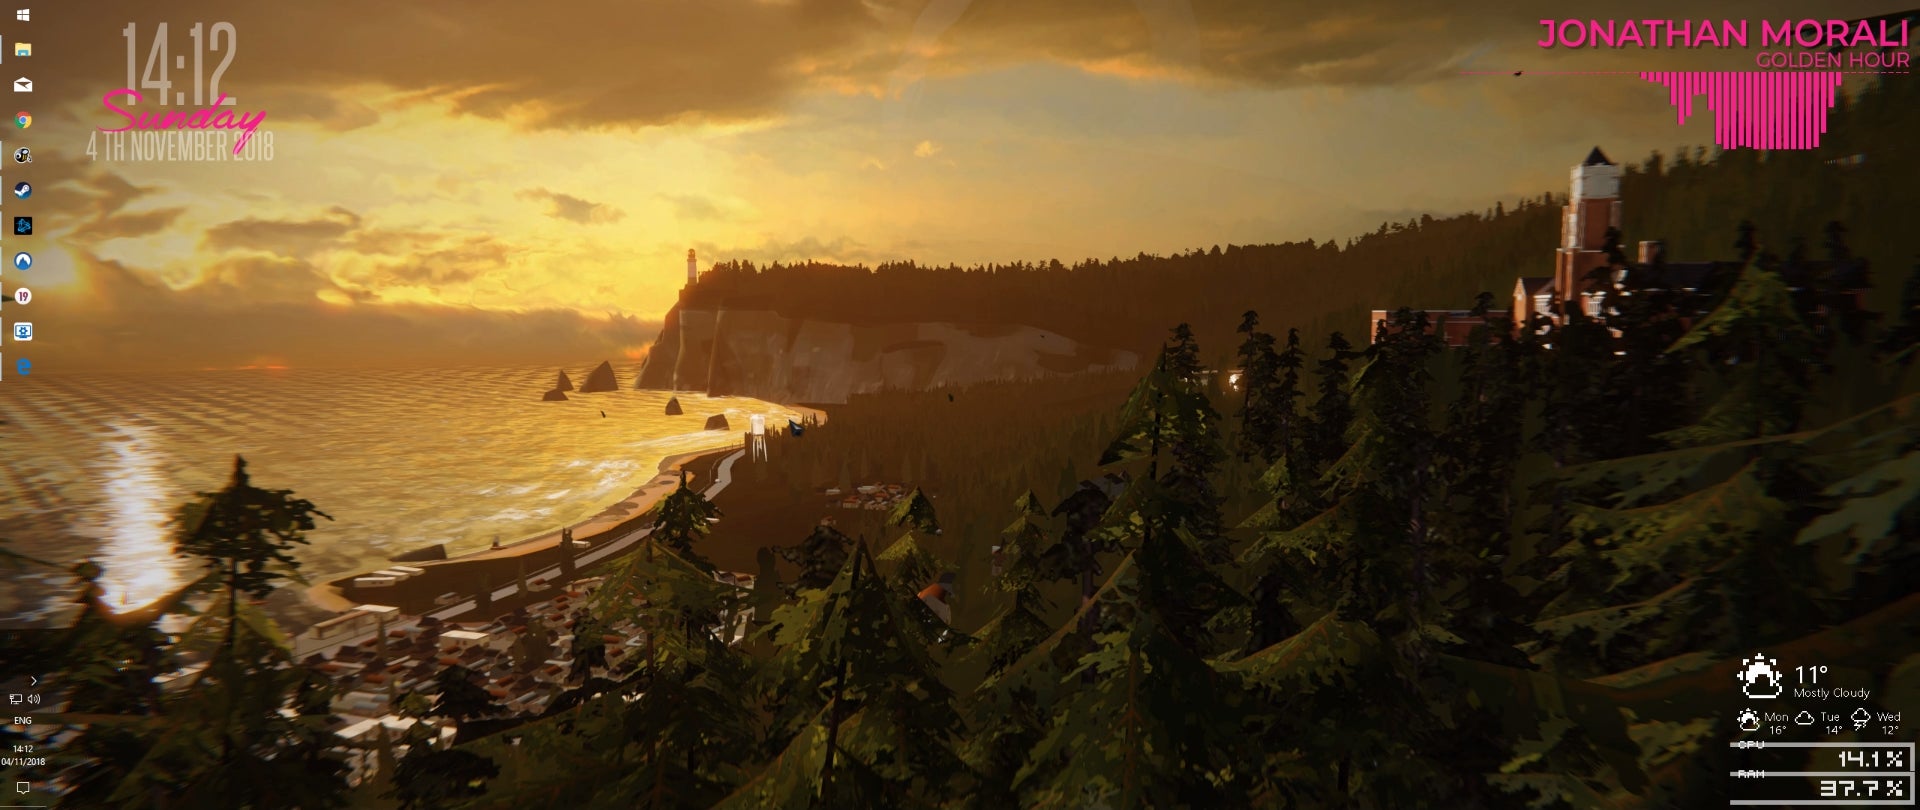 NO SPOILERS Arcadia Bay makes for a lovely background in Wallpaper Engine